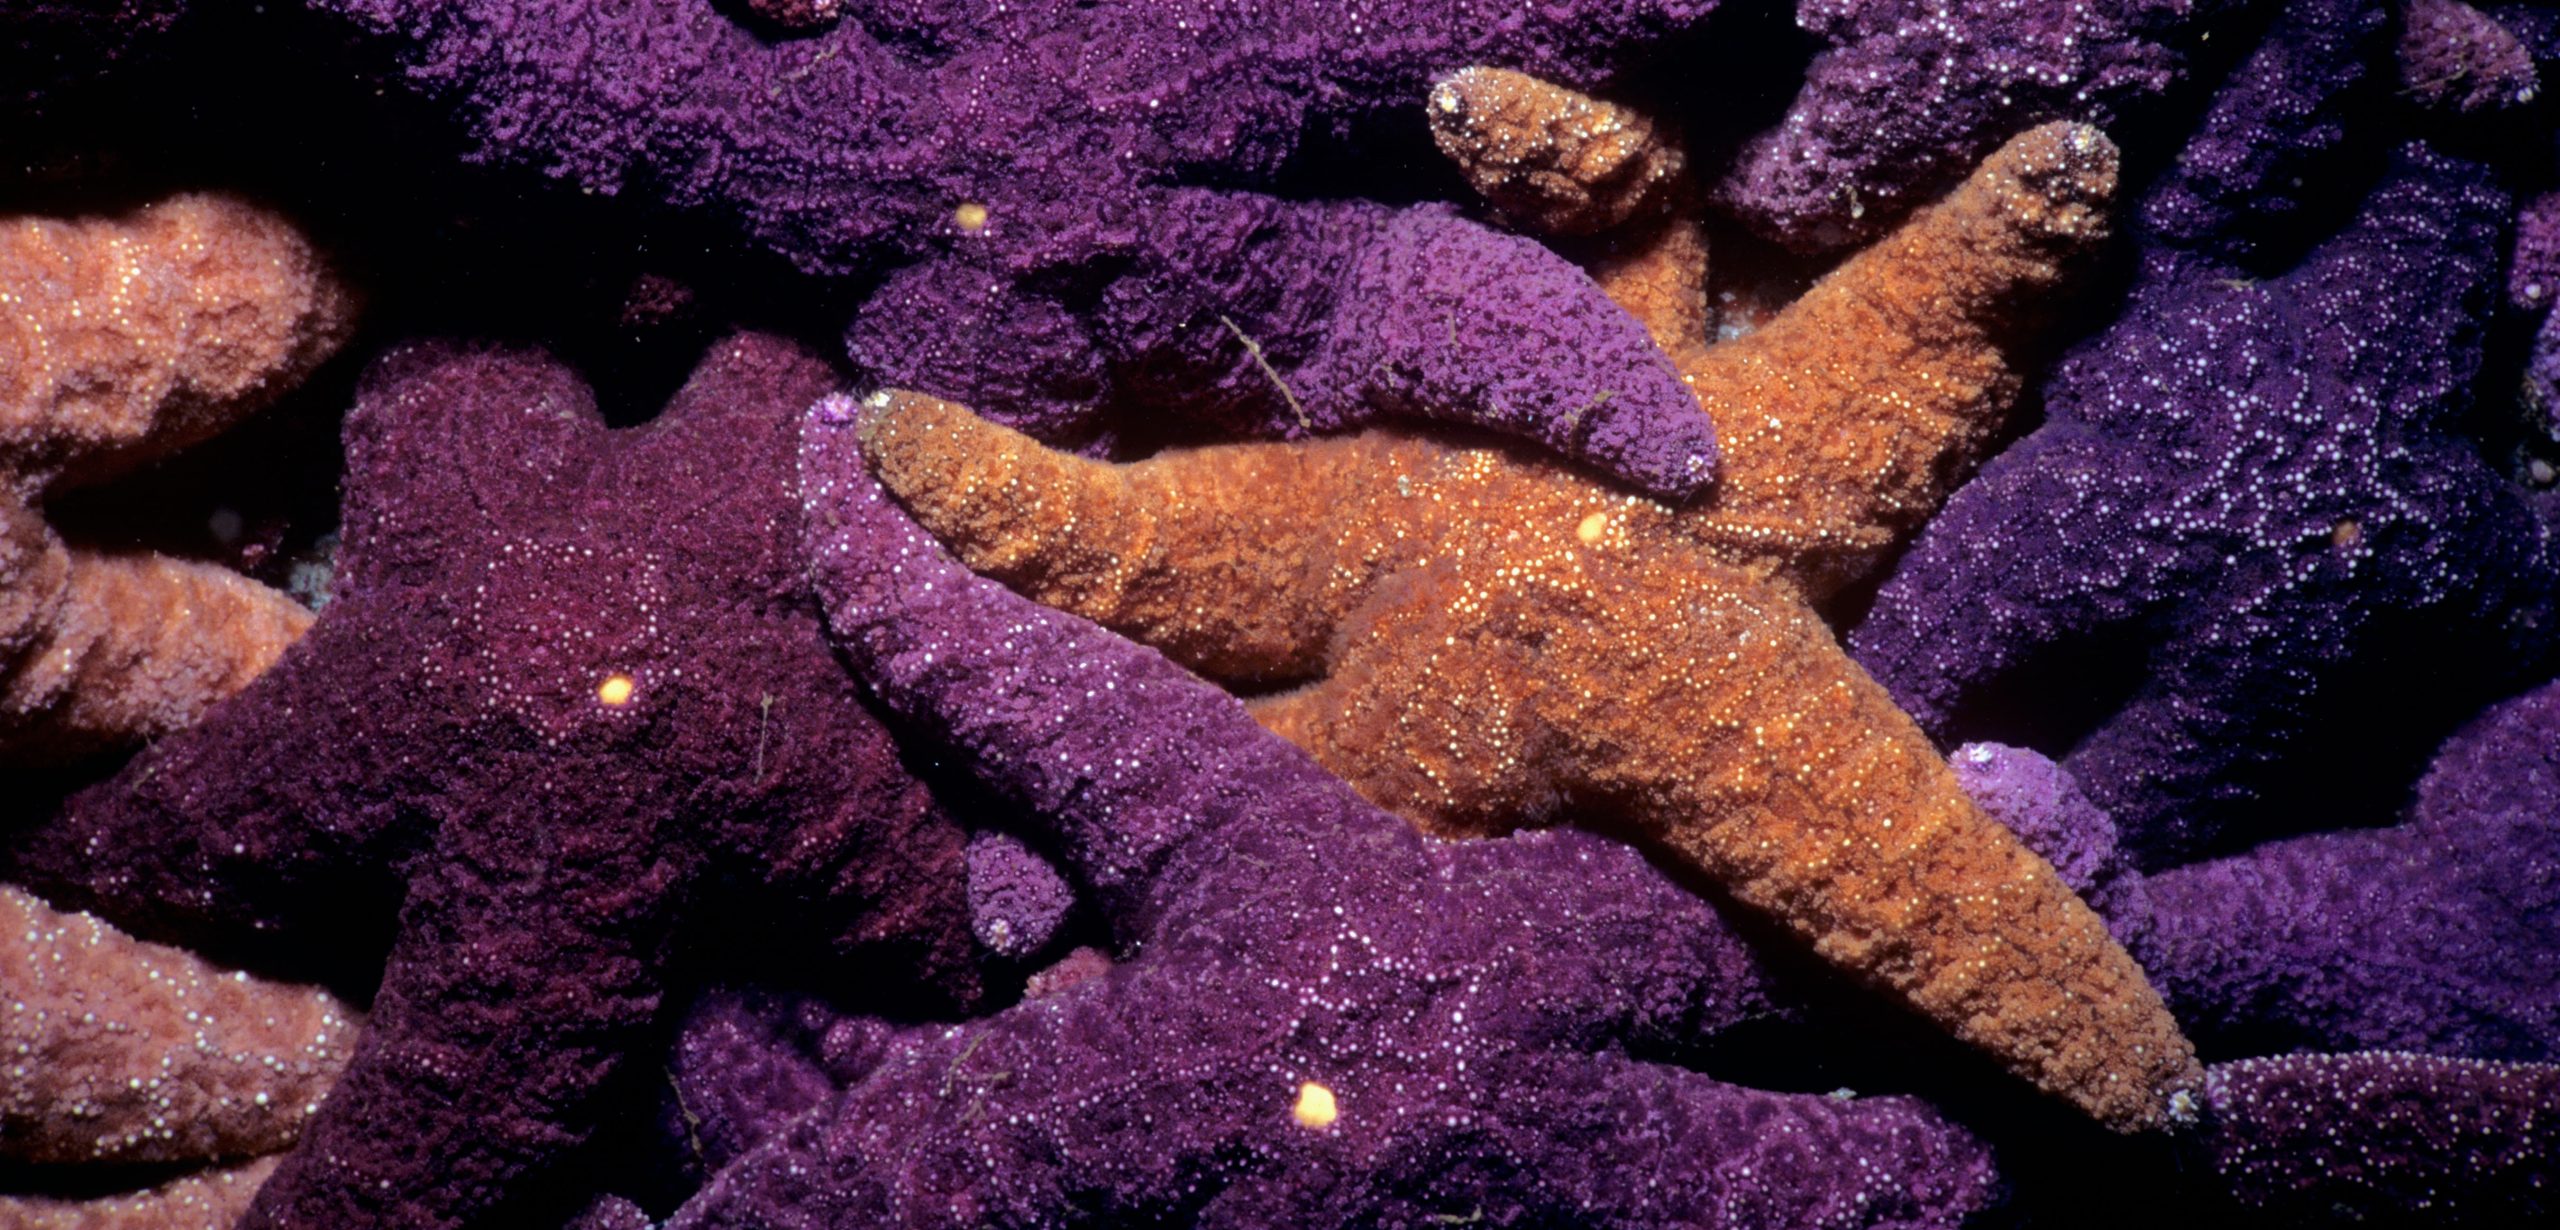 New research is causing the original keystone species, the ochre sea star Pisaster ochraceus, to lose some of its supposed ecosystem-controlling powers. Photo by Jeff Rotman/Alamy Stock Photo